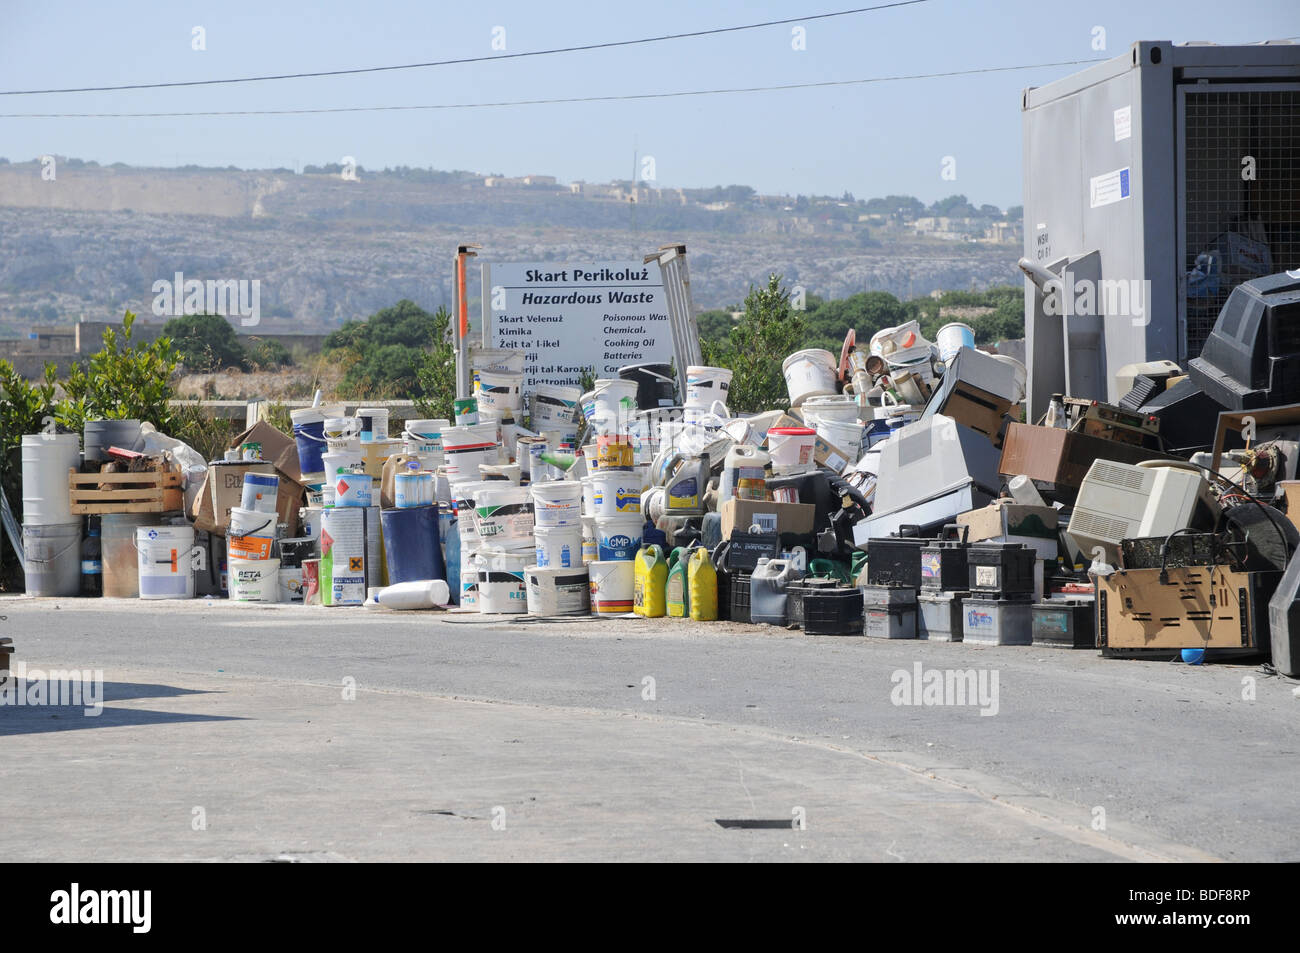 Paint buckets and fuel containers ready to be recycled at a waste management plant in Malta. Stock Photo